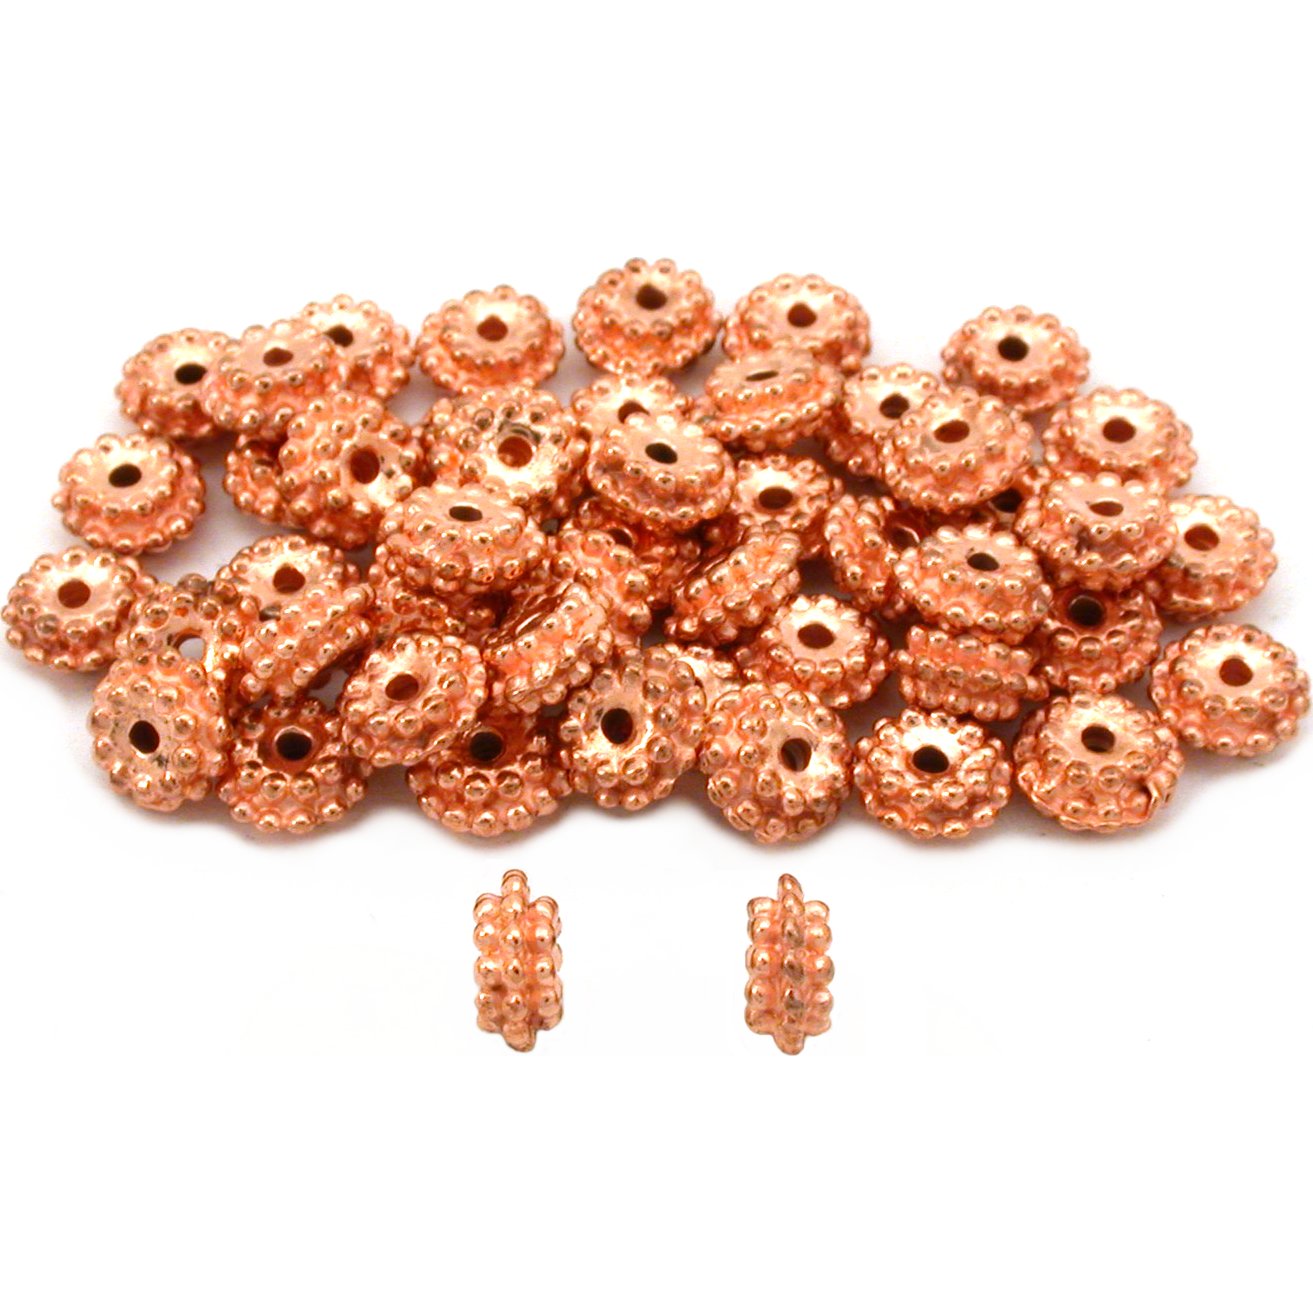 Bali Spacer Copper Plated Beads 7.5mm 50Pcs Approx.